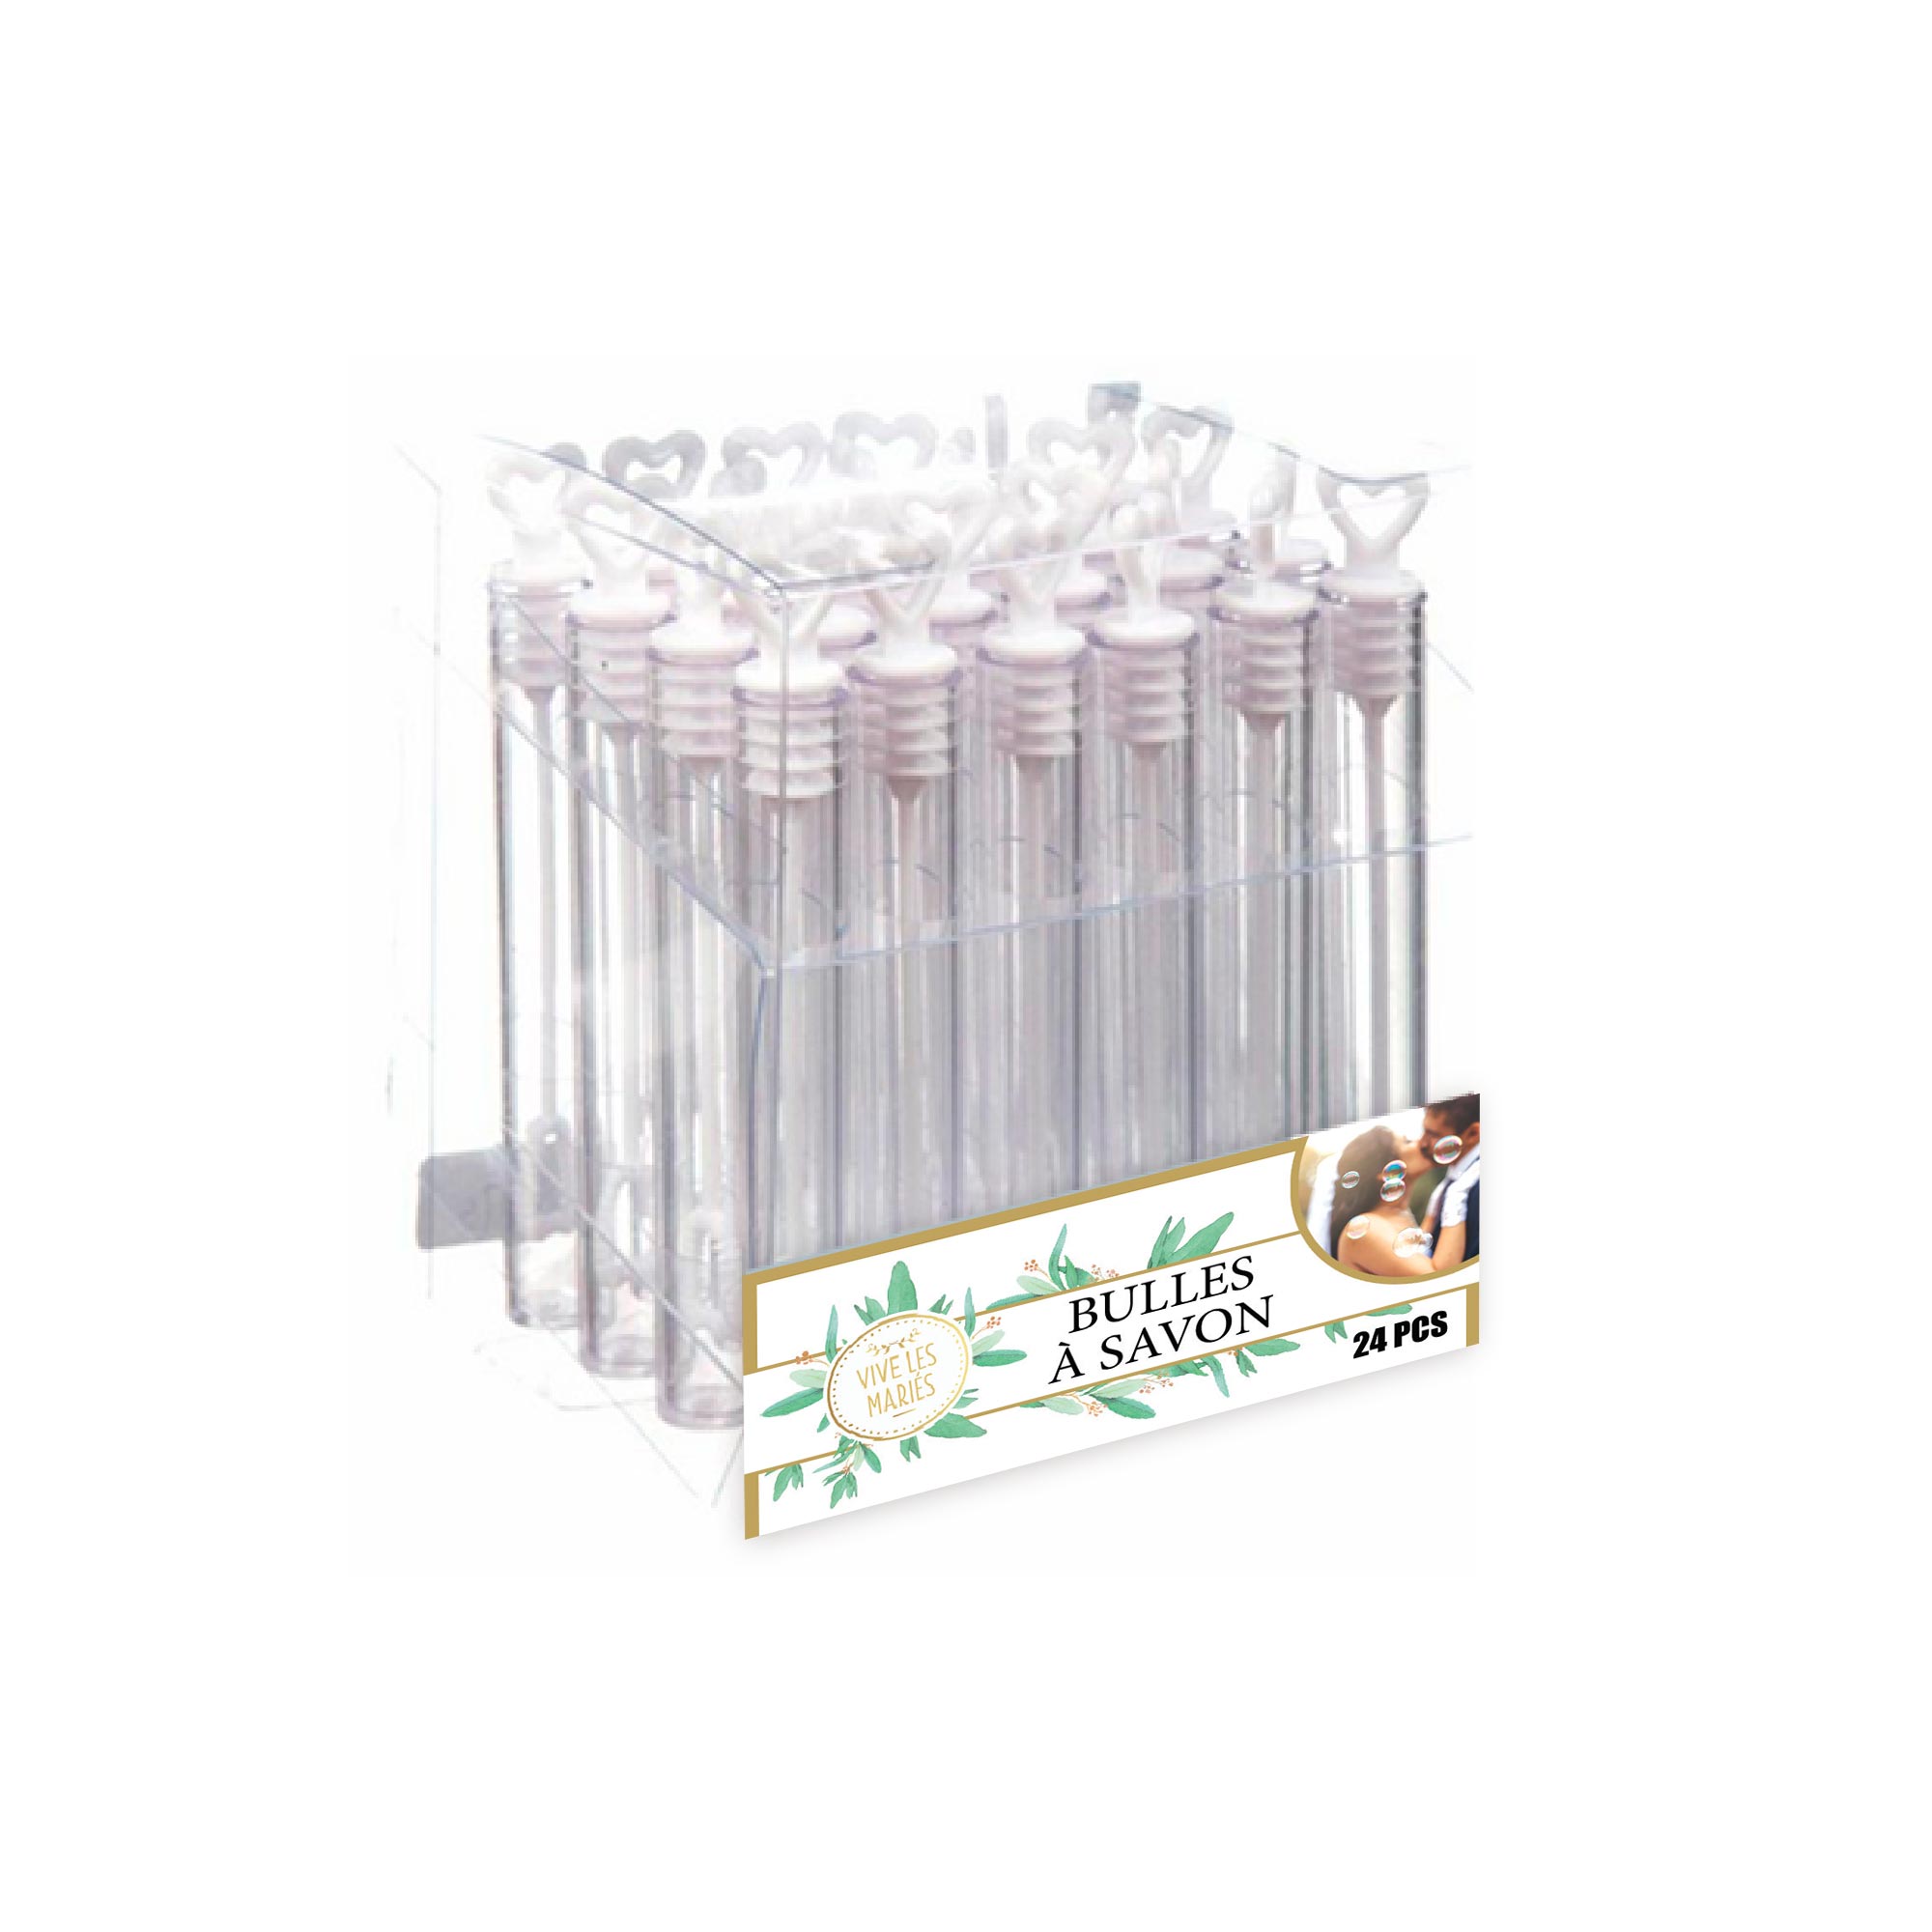 OCCASIONSSPECIALES-MARIAGERECEPTION-BULLESDESAVON-24TUBES